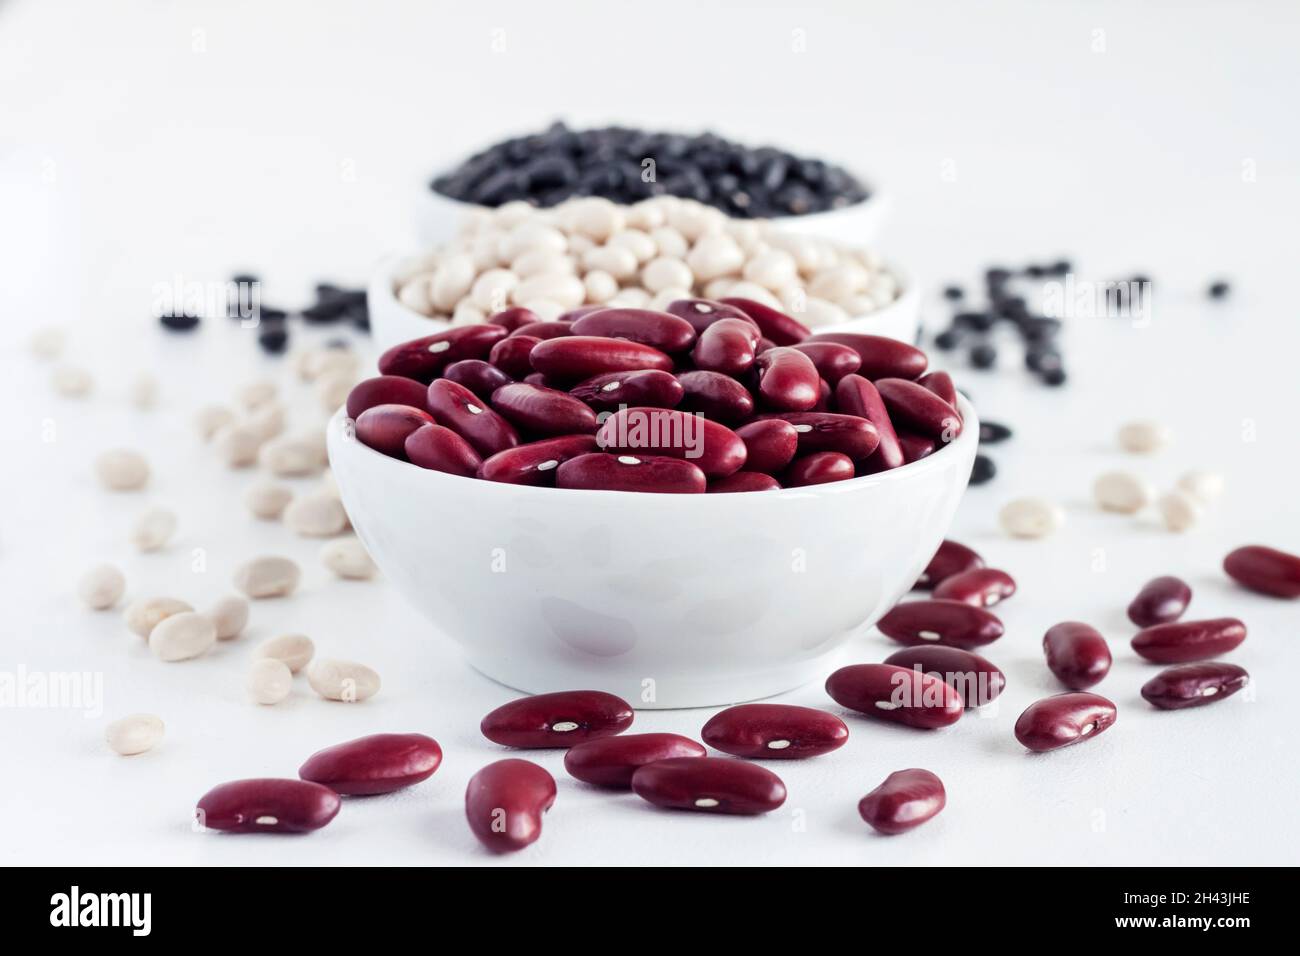 Assortment of beans in a white bowl on white background. Red kidney beans, white beans and black beans Stock Photo